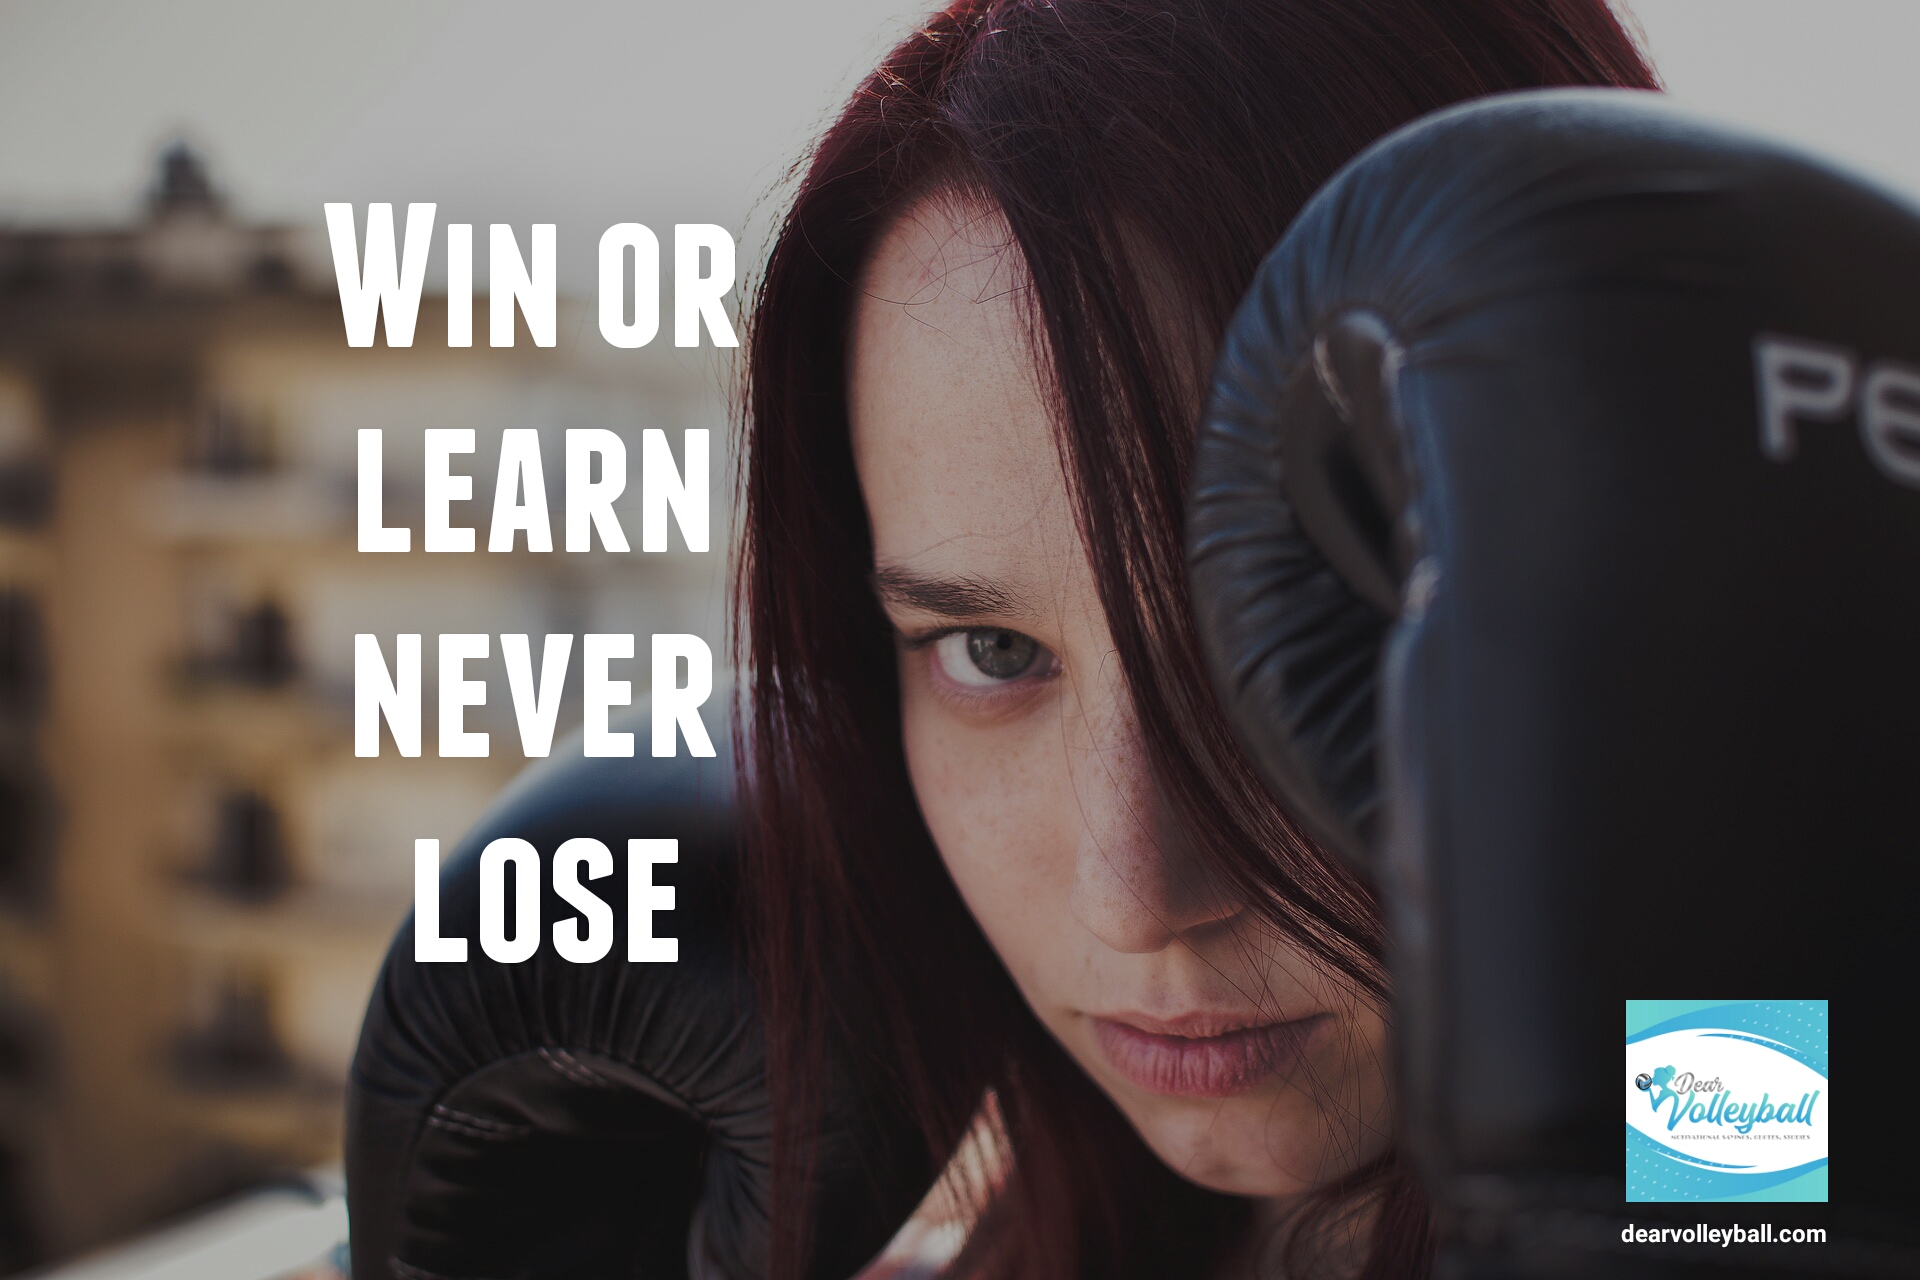 "Win or learn, never lose." and other strong girls pictures paired with an inspirational volleyball quote on Dear Volleyball.com.